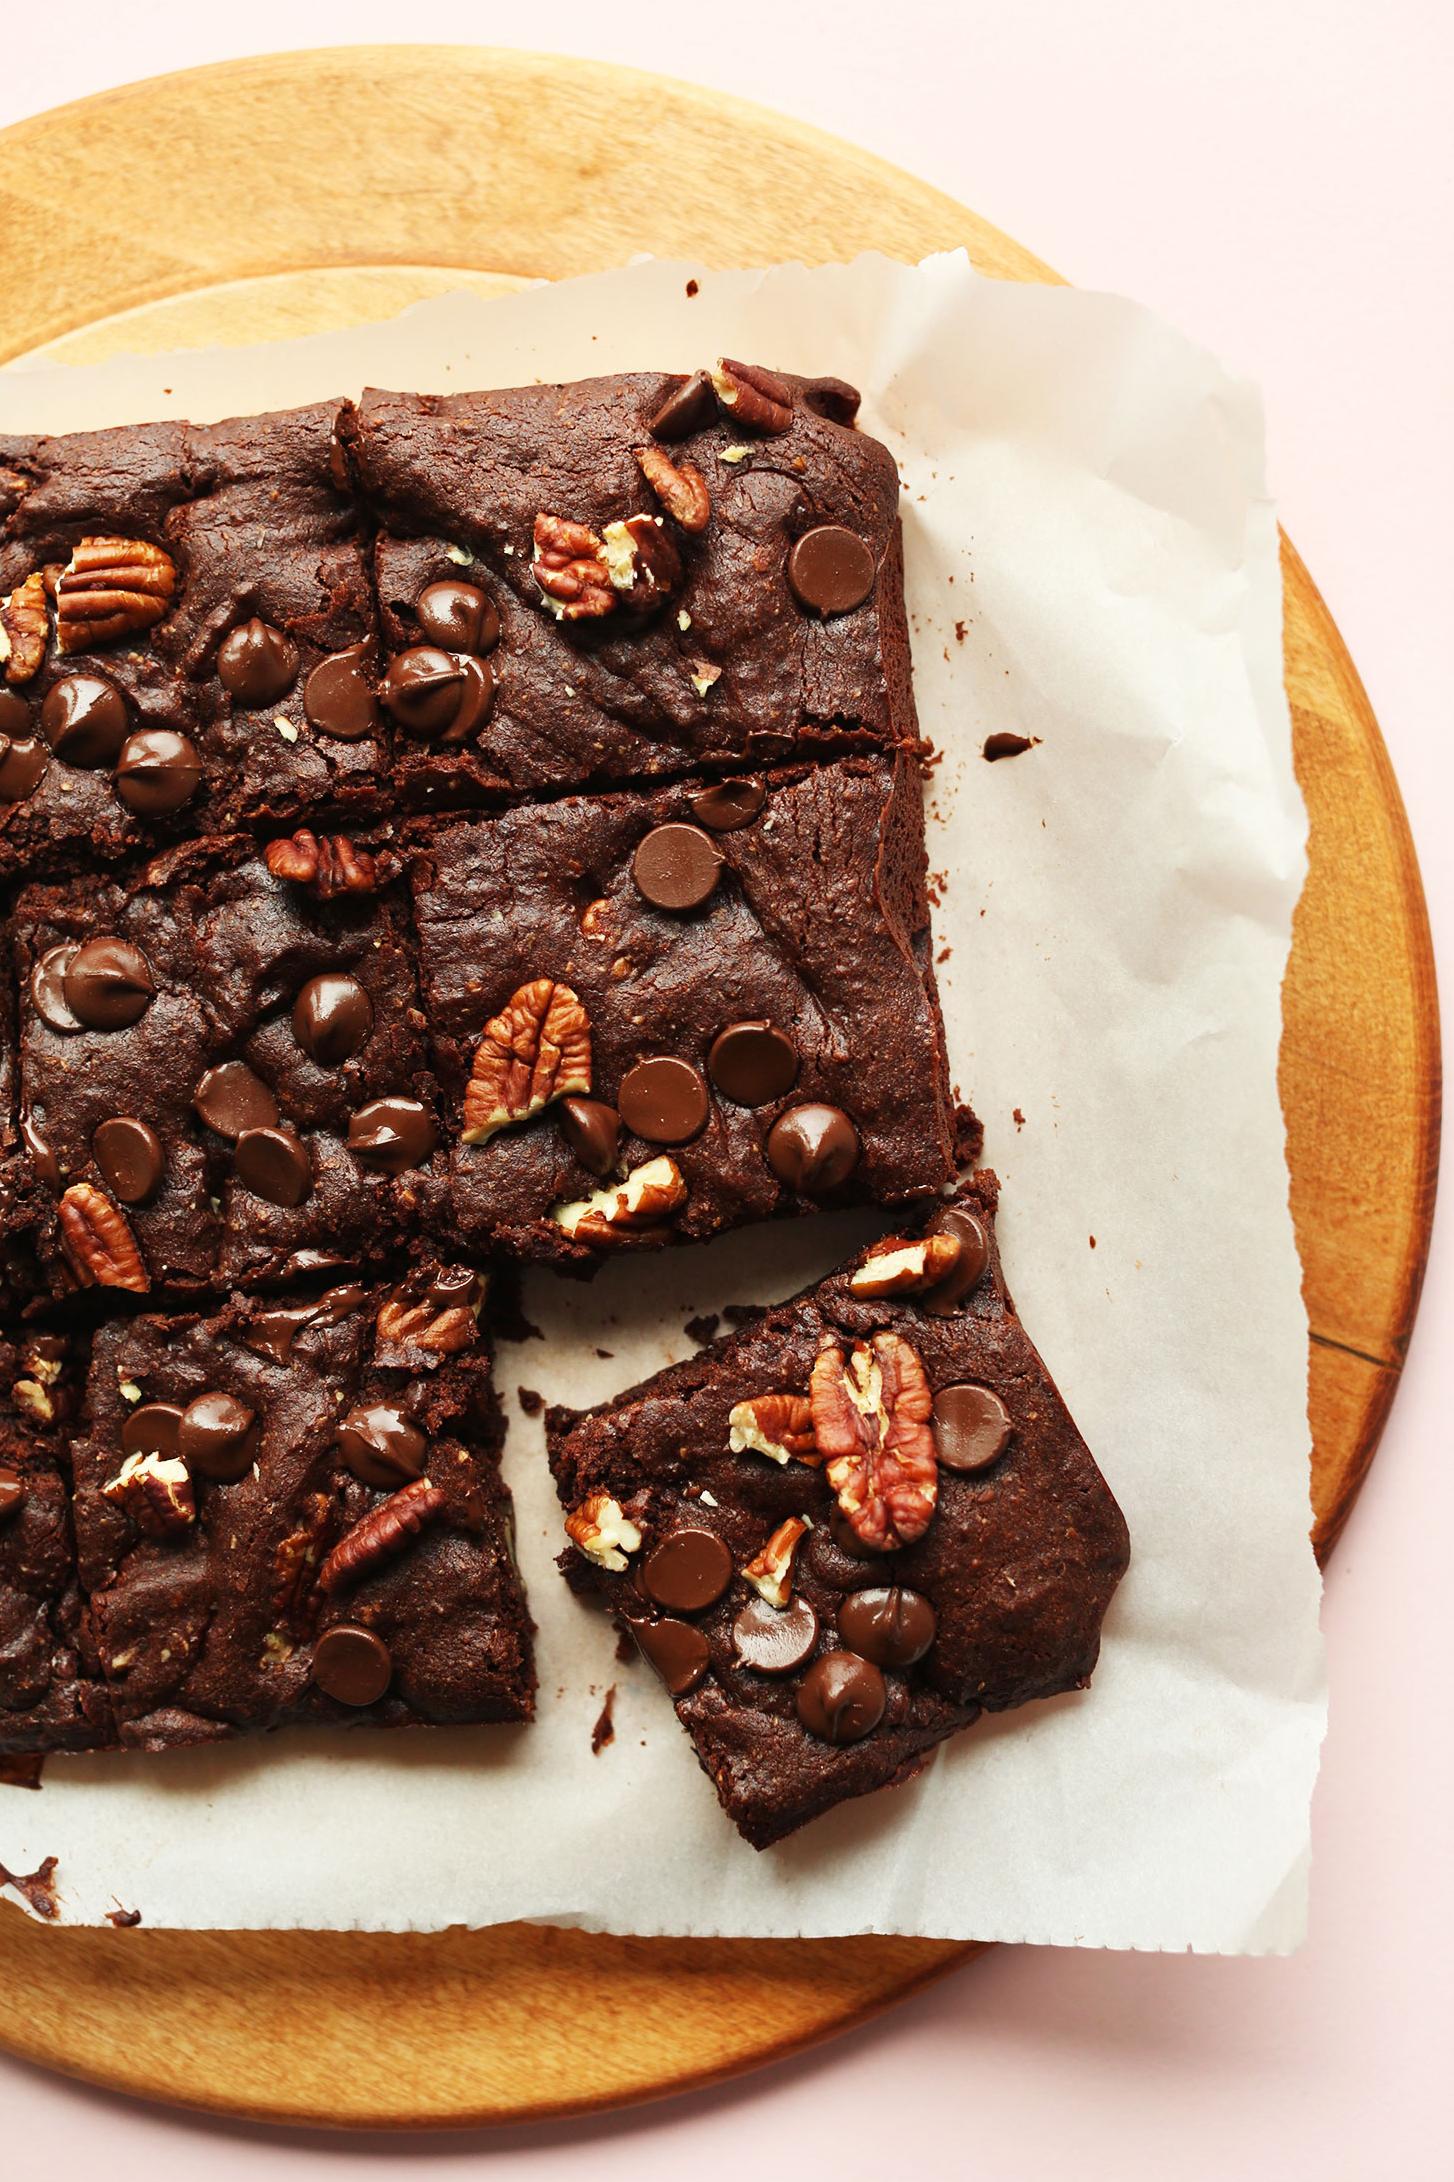  Indulge in guilt-free decadence with these Vegan Gluten Free Brownies!